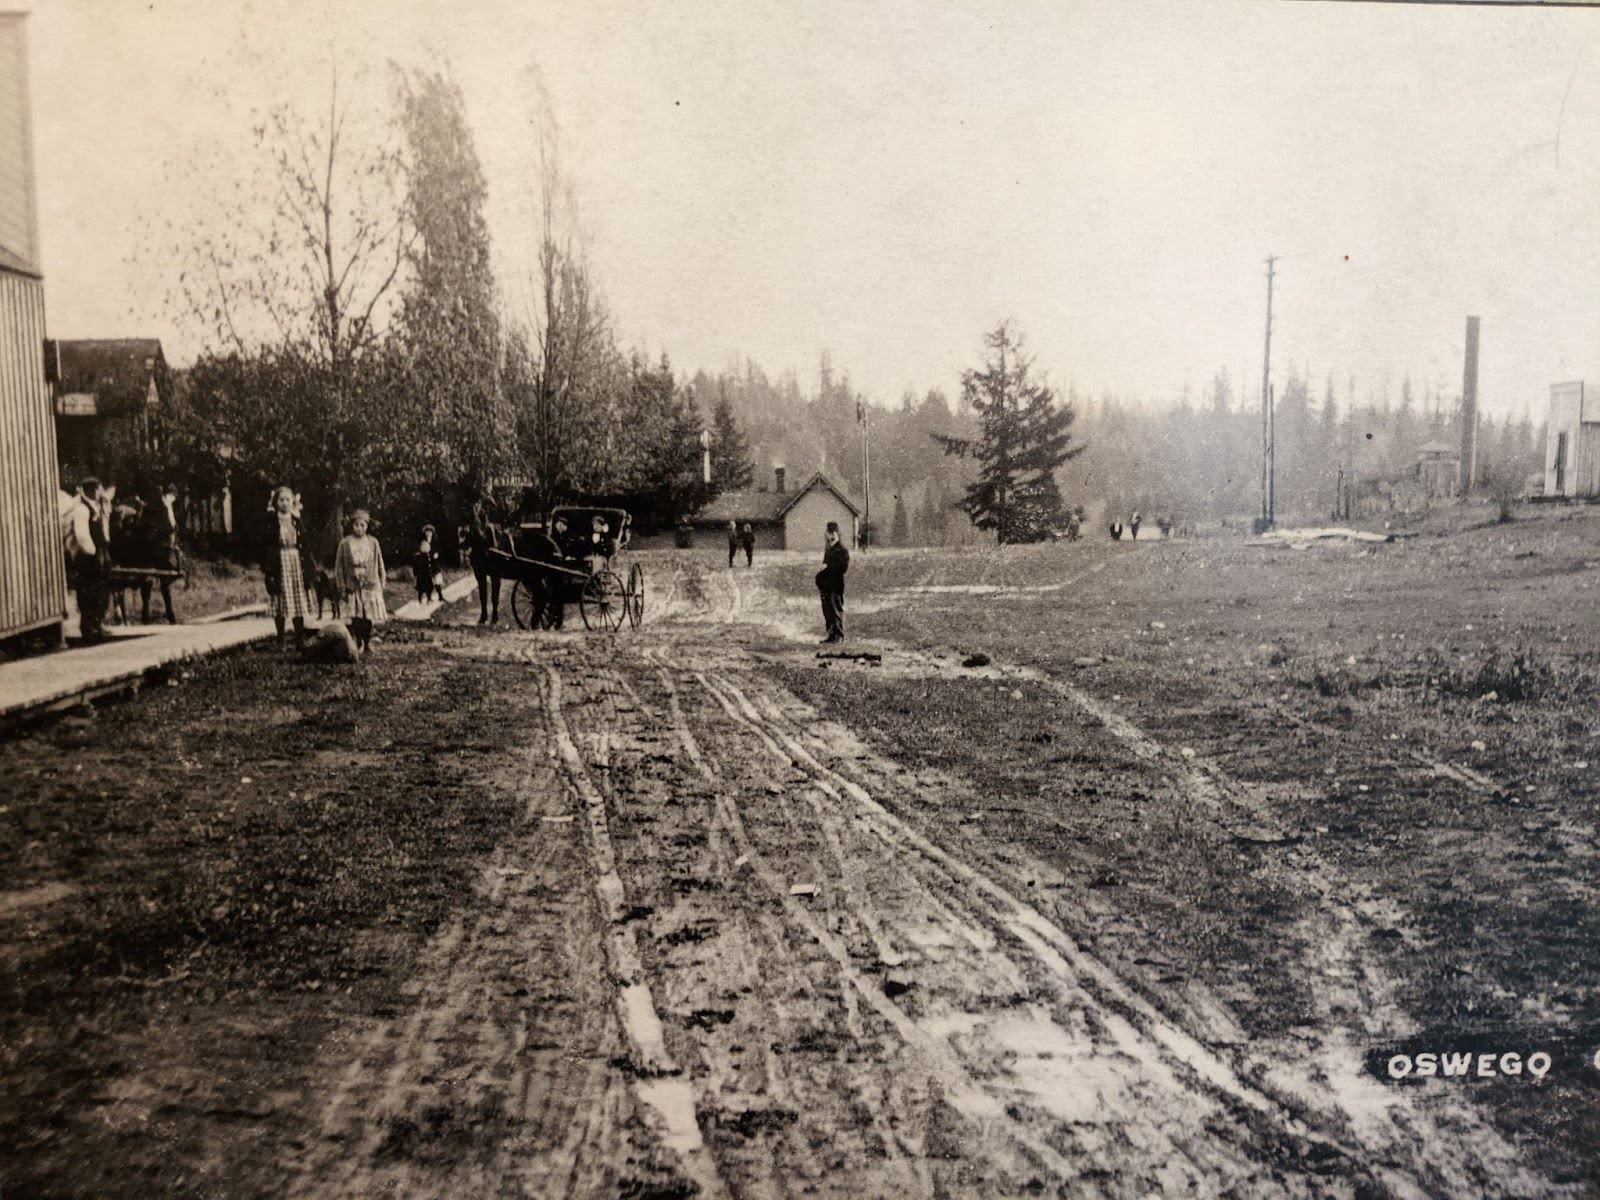 A circa 1890 street in Lake Oswego. The street is mostly mud, with tracks through it from wagons and coaches. A coach being pulled by a horse is visible, and several people are around.